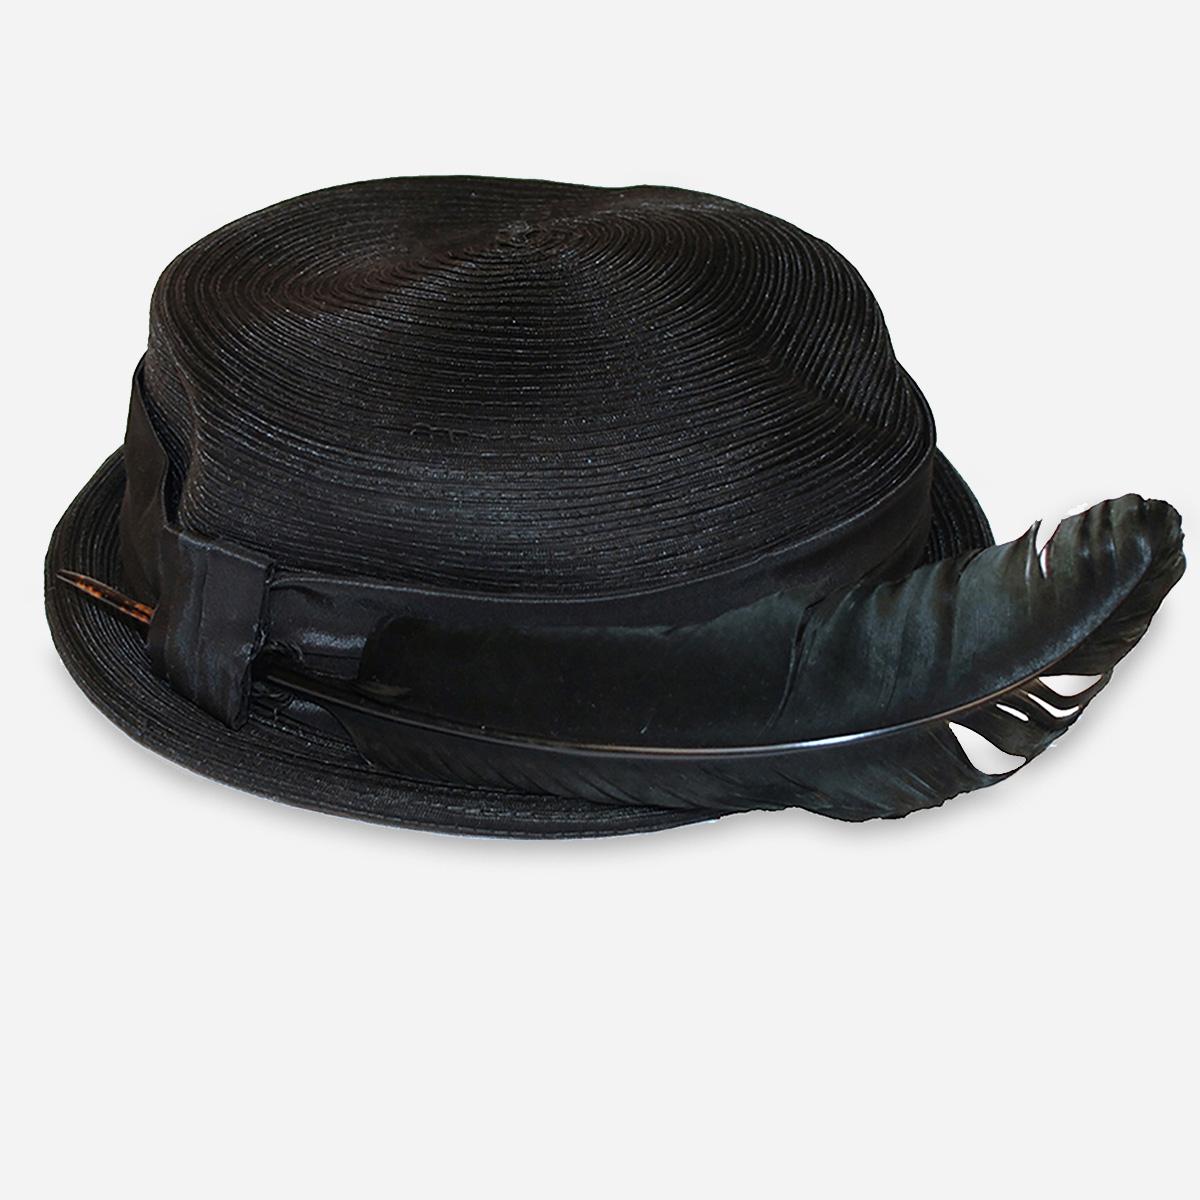 1950s black hat, quill feather